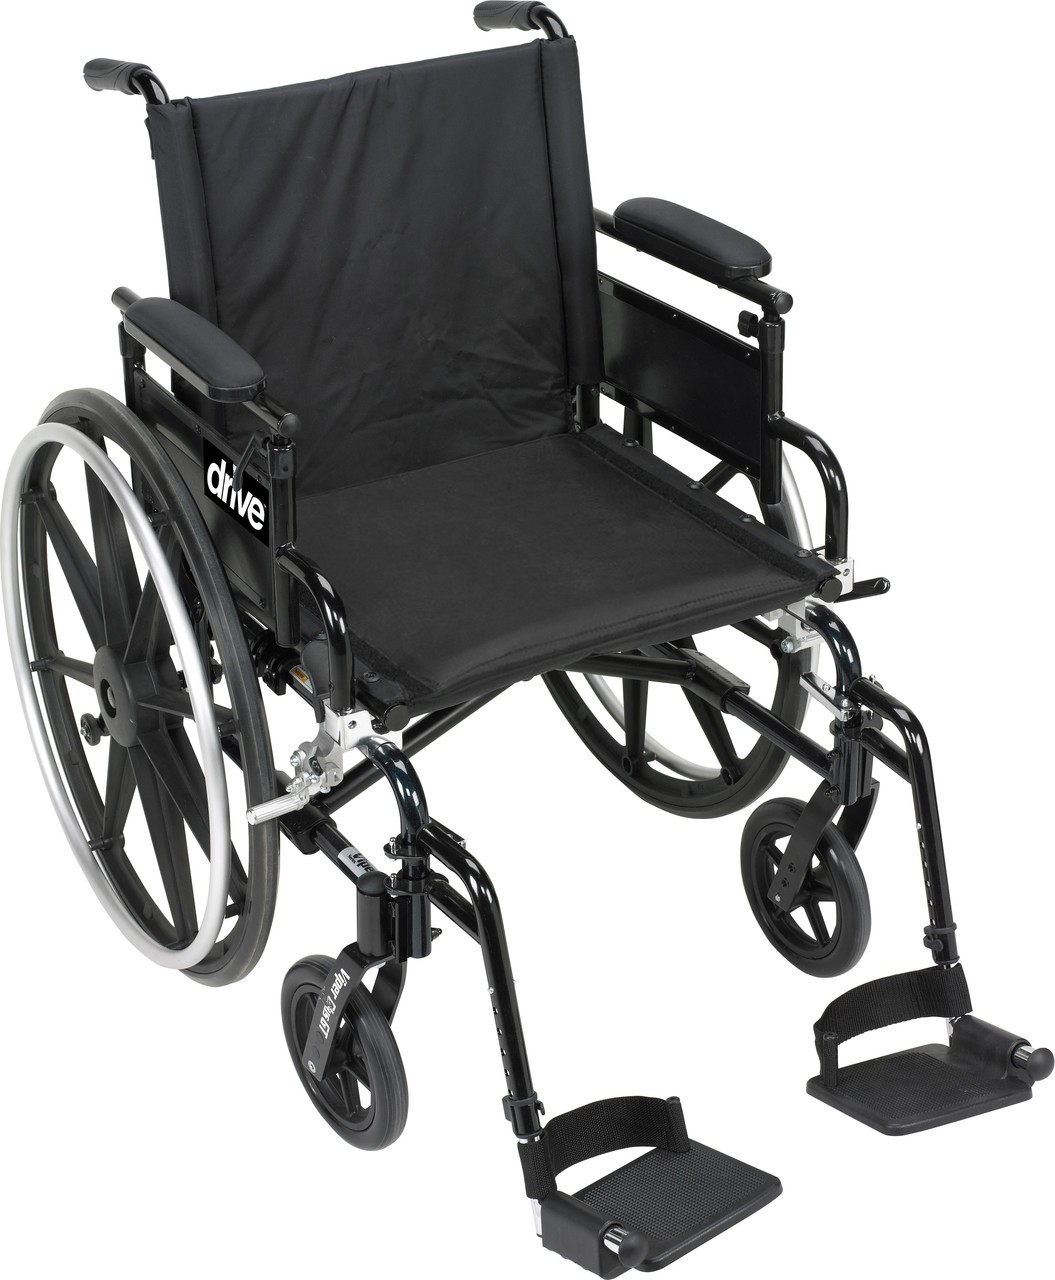 Drive PLA418FBFAARAD-ELR Viper Plus GT Wheelchair with Flip Back Removable Adjustable Full Arms, Elevating Leg Rests, 18"